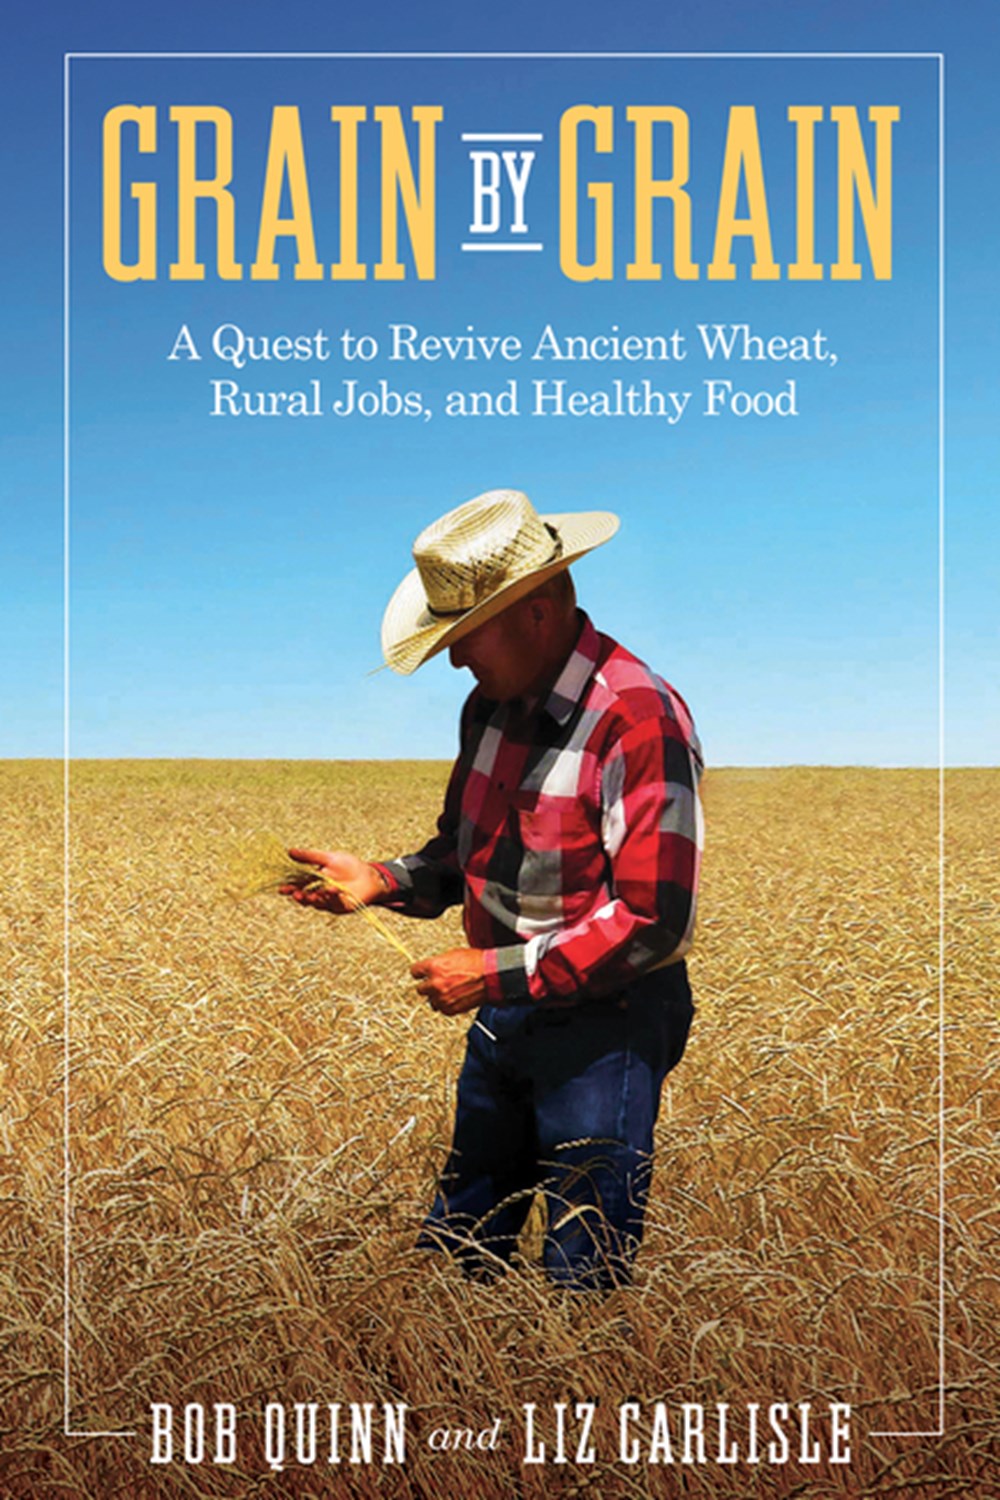 Grain by Grain A Quest to Revive Ancient Wheat, Rural Jobs, and Healthy Food